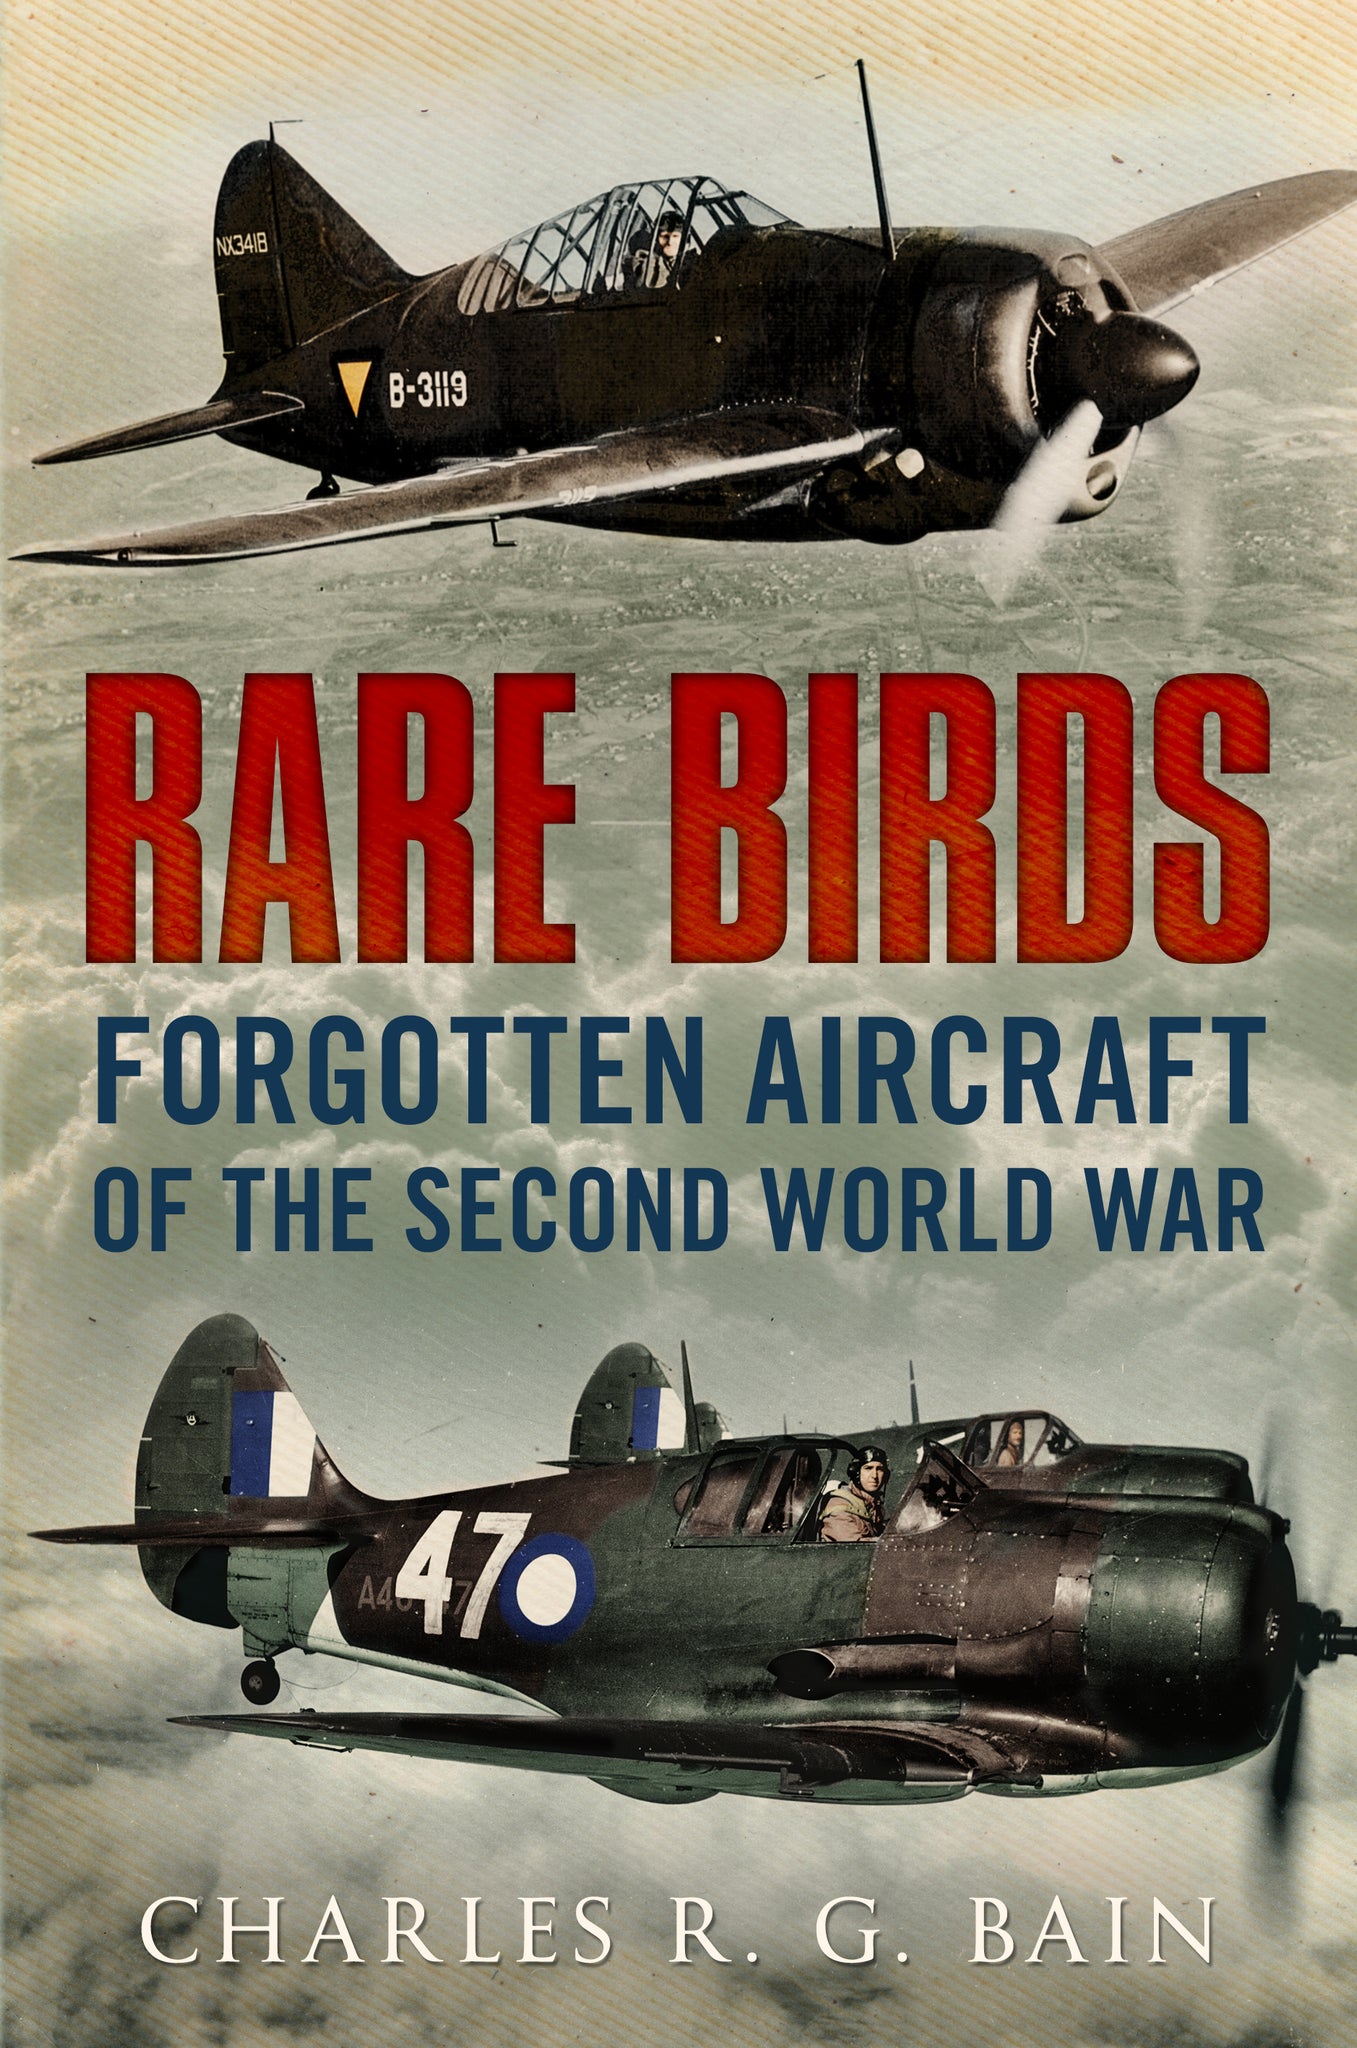 Rare Birds: Forgotten Aircraft of the Second World War - available now from Fonthill Media